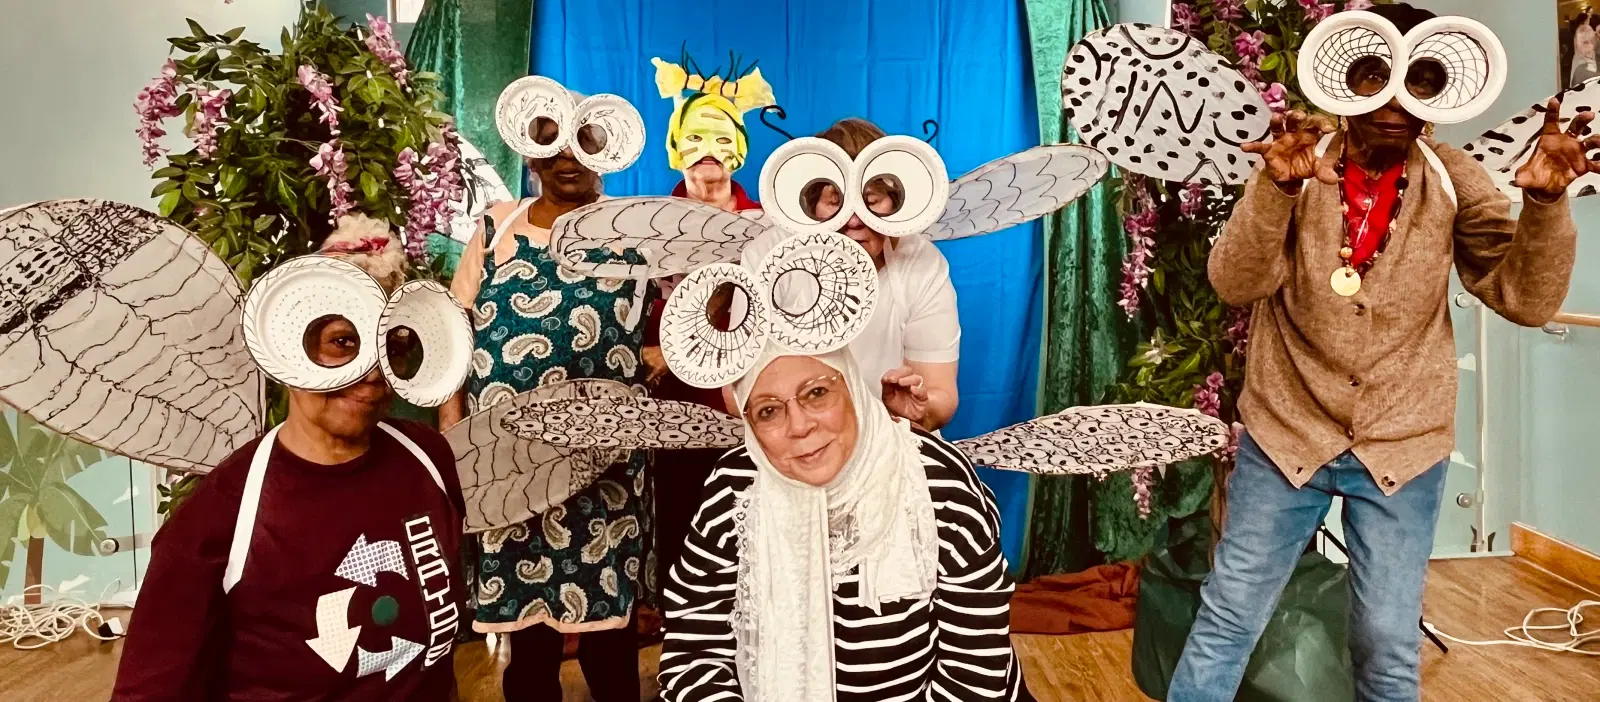 A group of people playfully posing with owl masks and whimsical headgear at a fun-themed event or party.